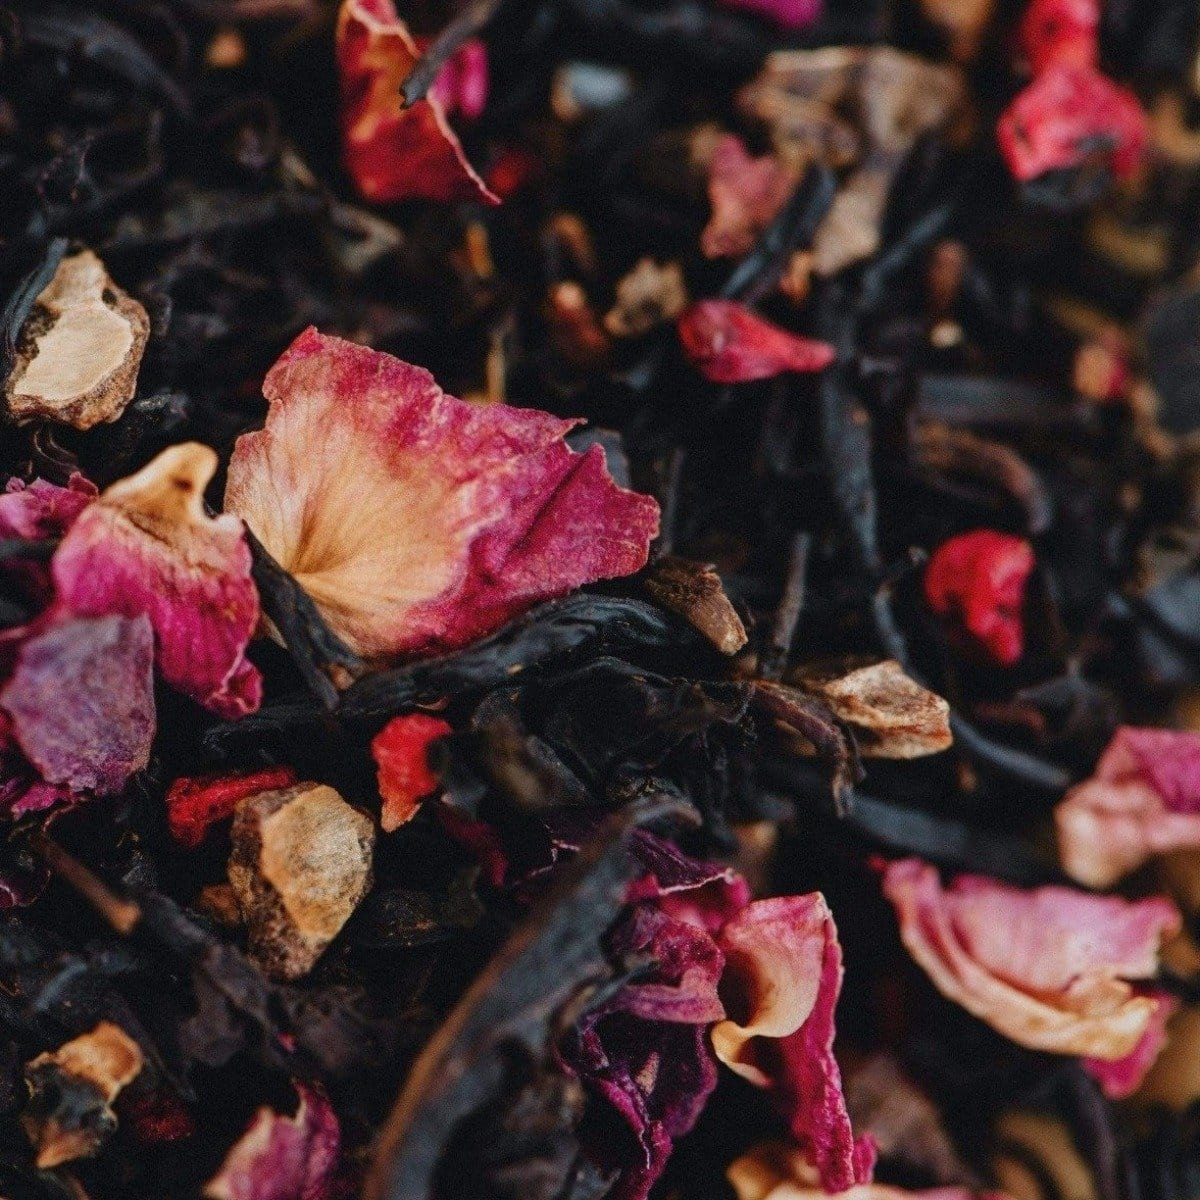 A close-up image of a blend of dried organic tea leaves mixed with vibrant pink and red rose petals, creating a colorful and textured composition. The varied shapes and hues of the petals contrast beautifully with the dark leaves in Magic Hour's Soulmate: Chocolate-Raspberry-Rose Black Tea for Finding & Celebrating Love.